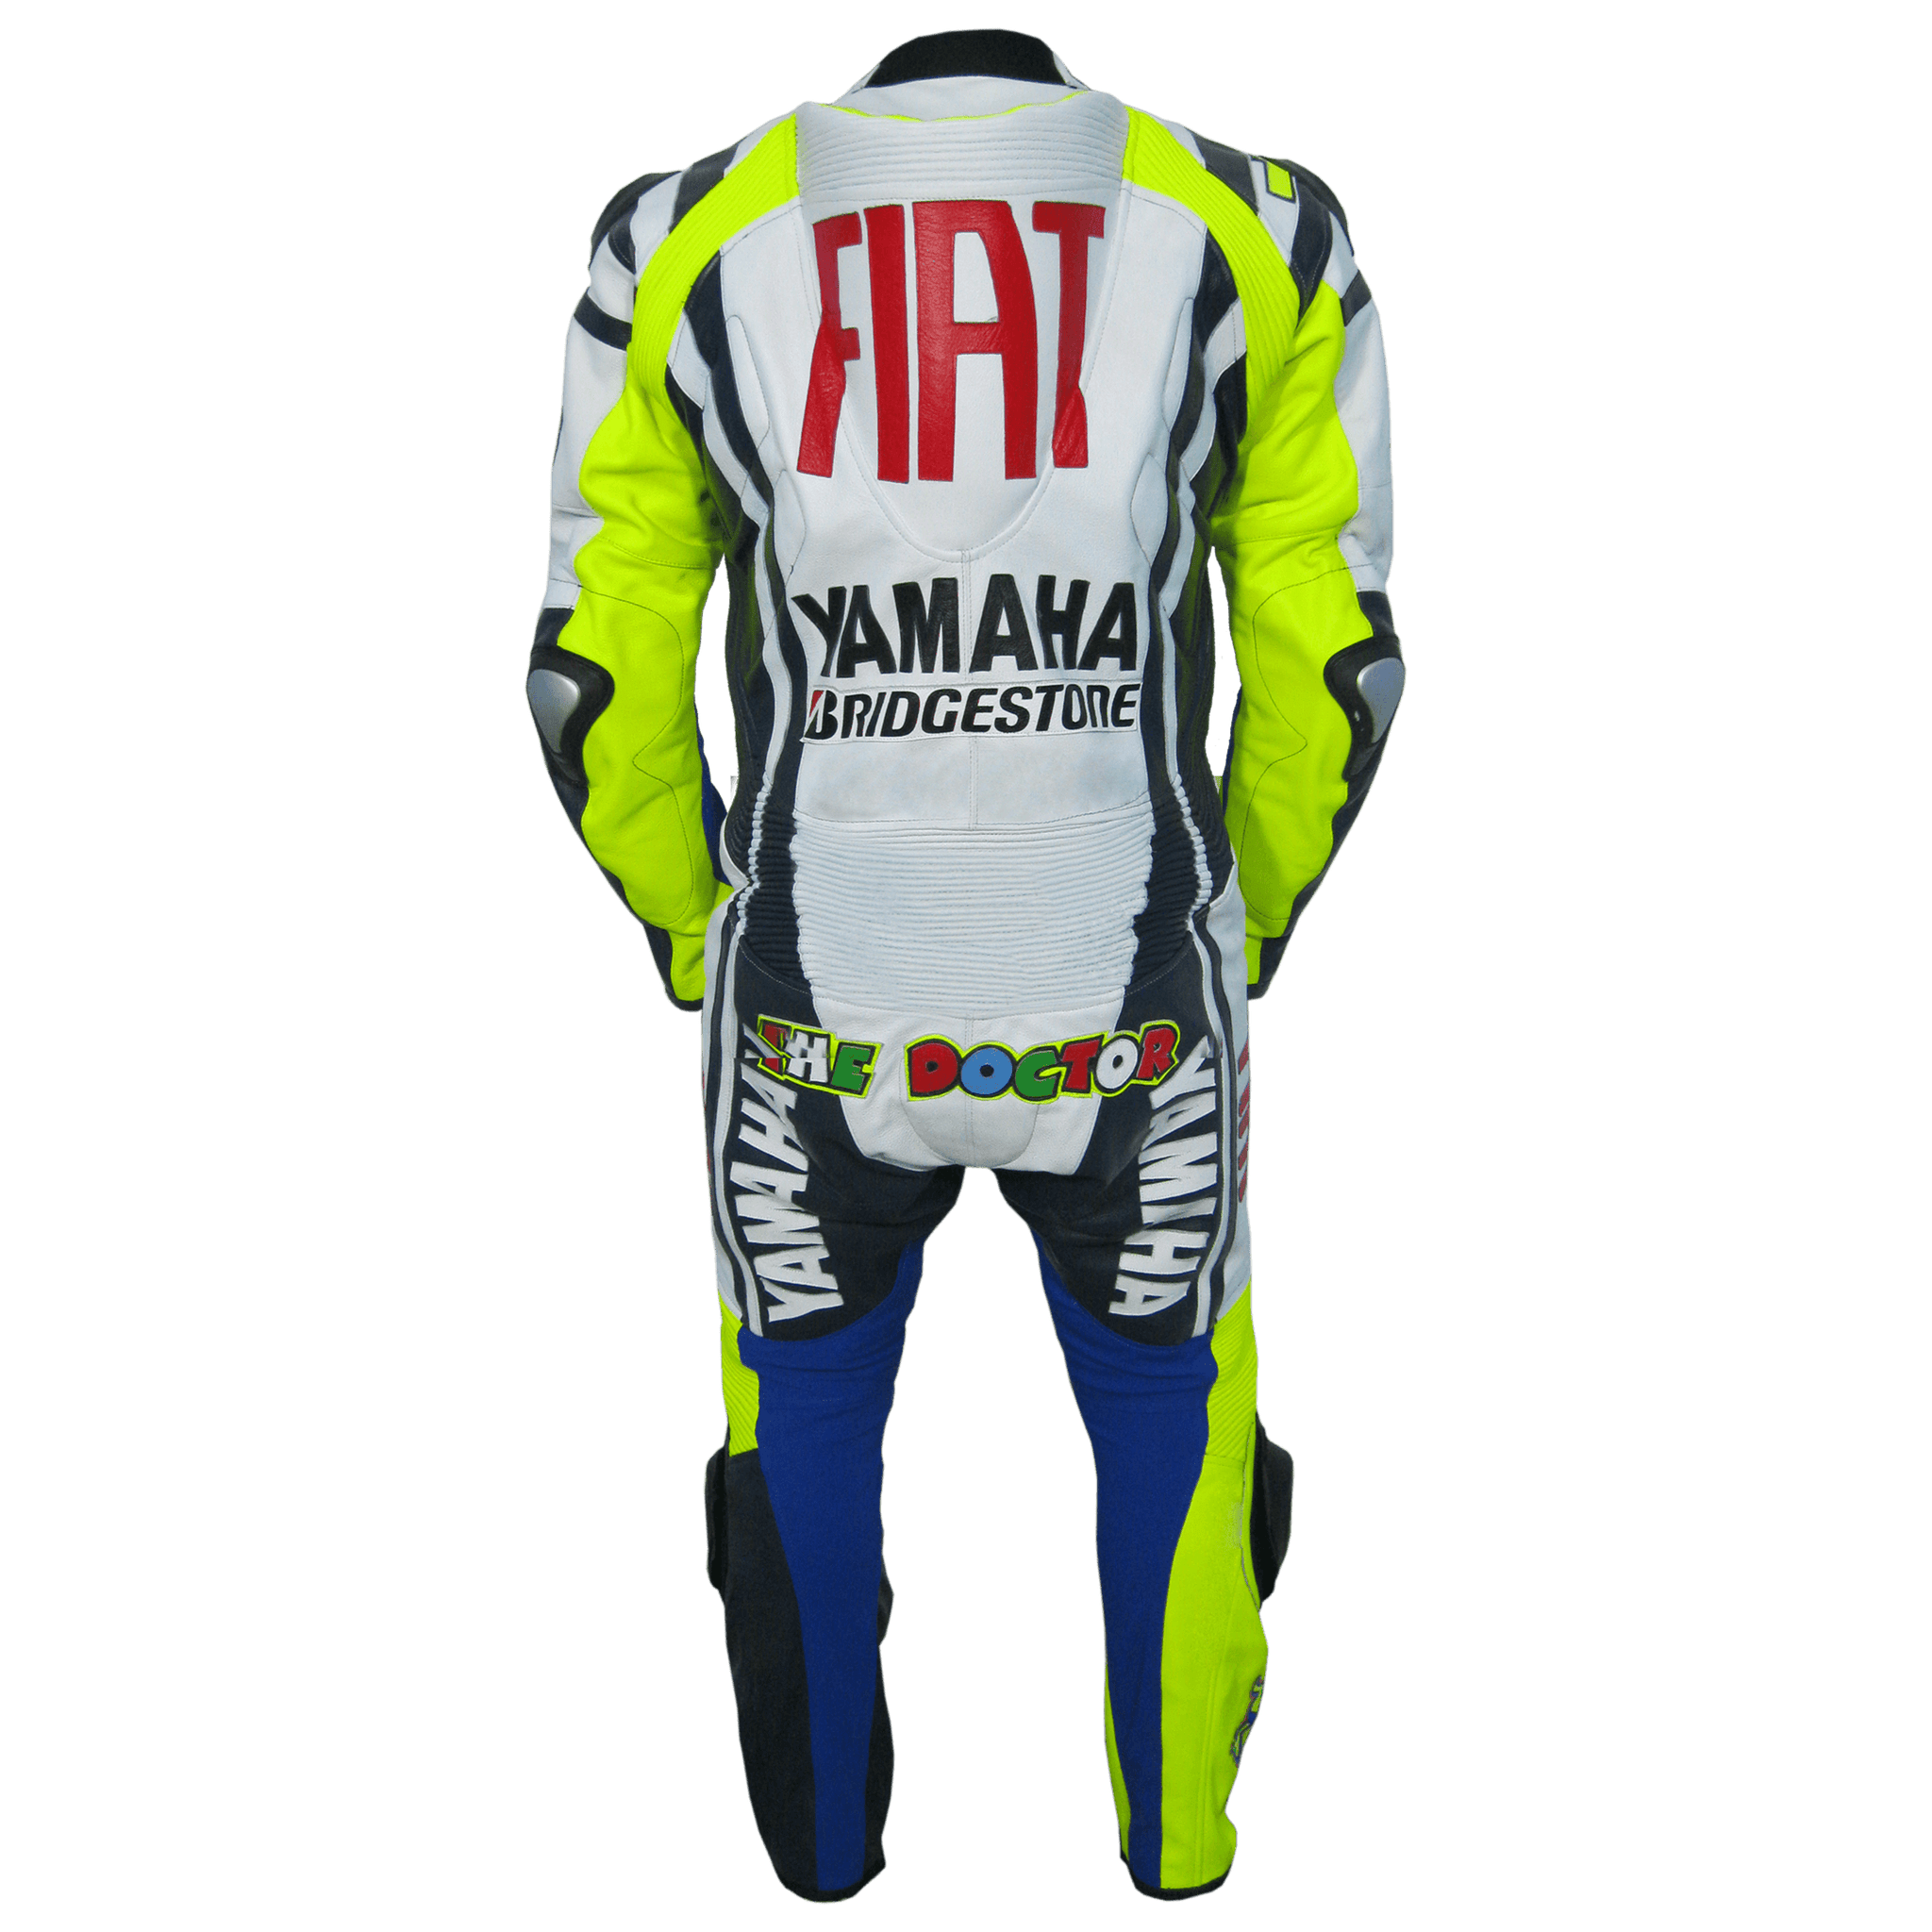 Valentino Rossi Yamaha Fiat MotoGp Racing Leather Suit - Repsters